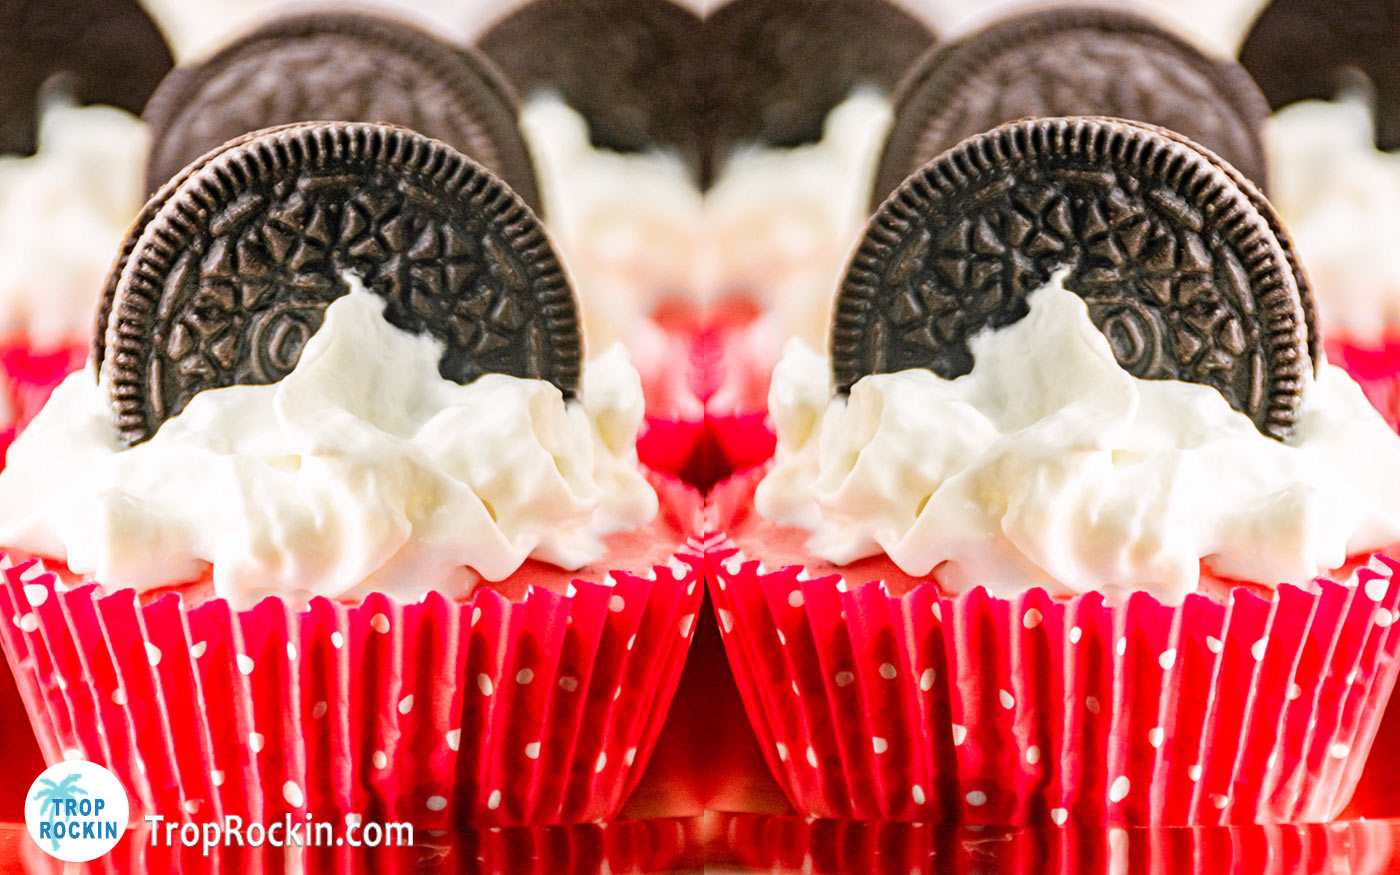 Plate of mini red velvet oreo cheesecakes with two up close.